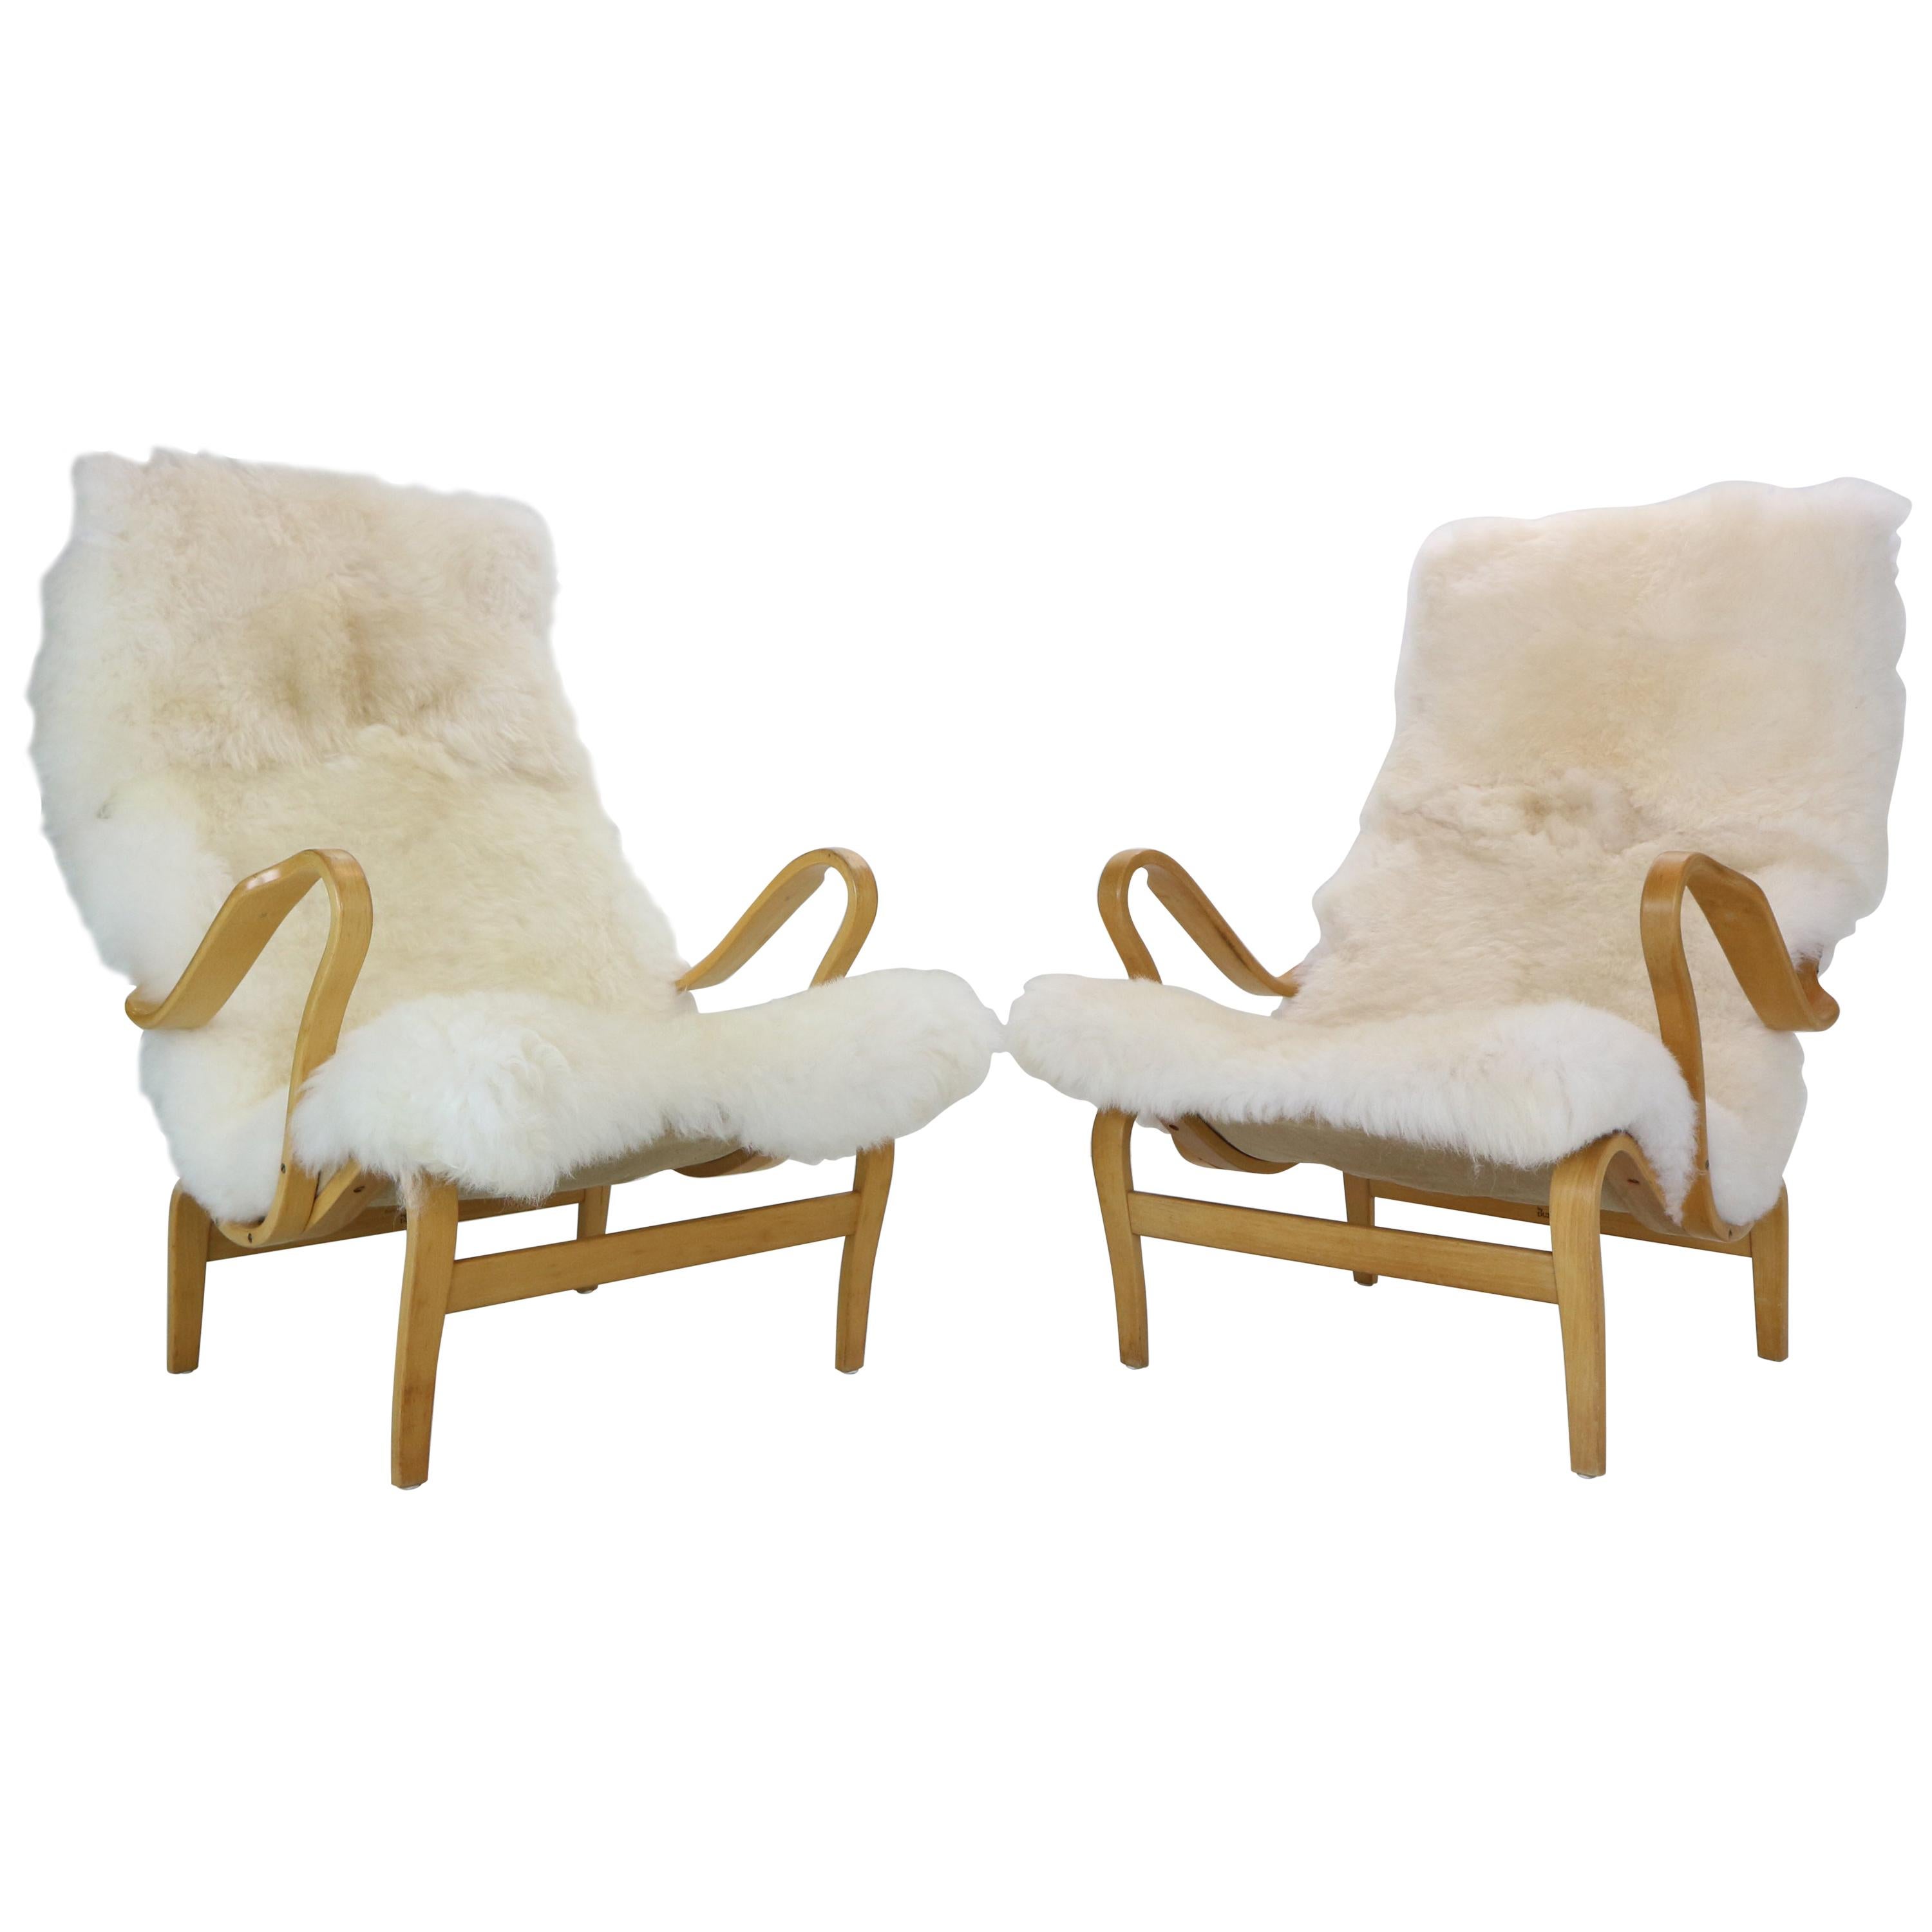 Bruno Mathsson Set of 2 "Pernilla" Lounge Chairs for DUX, 1969, Sweden